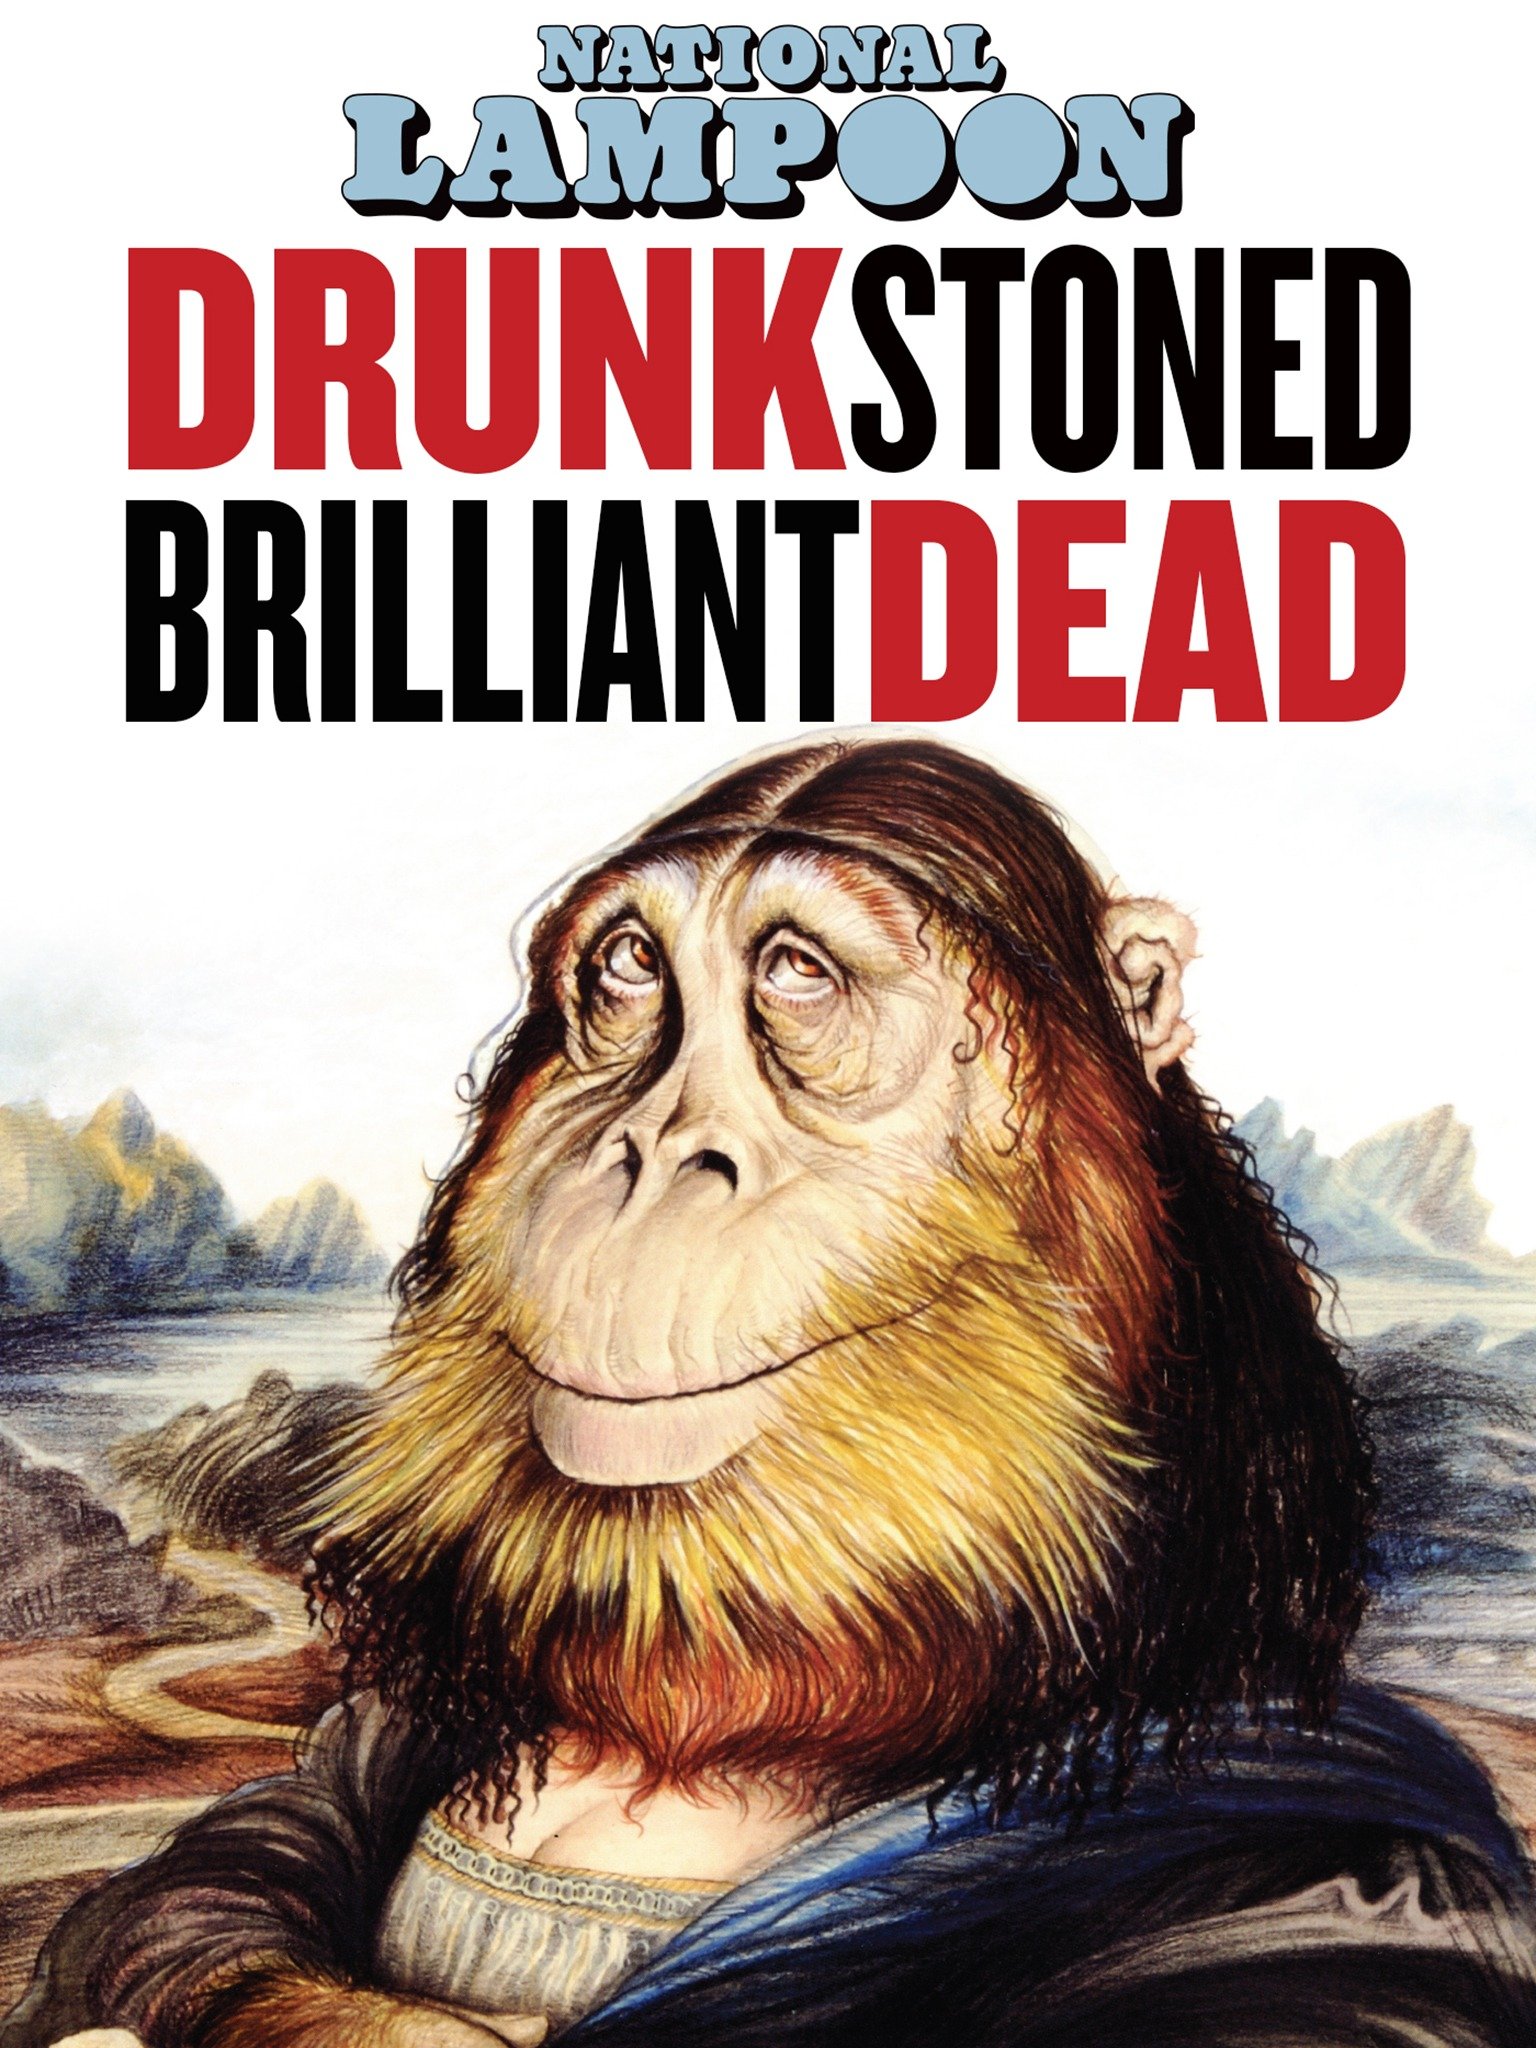 Drunk Stoned Brilliant Dead The Story Of The National Lampoon 2015 Rotten Tomatoes